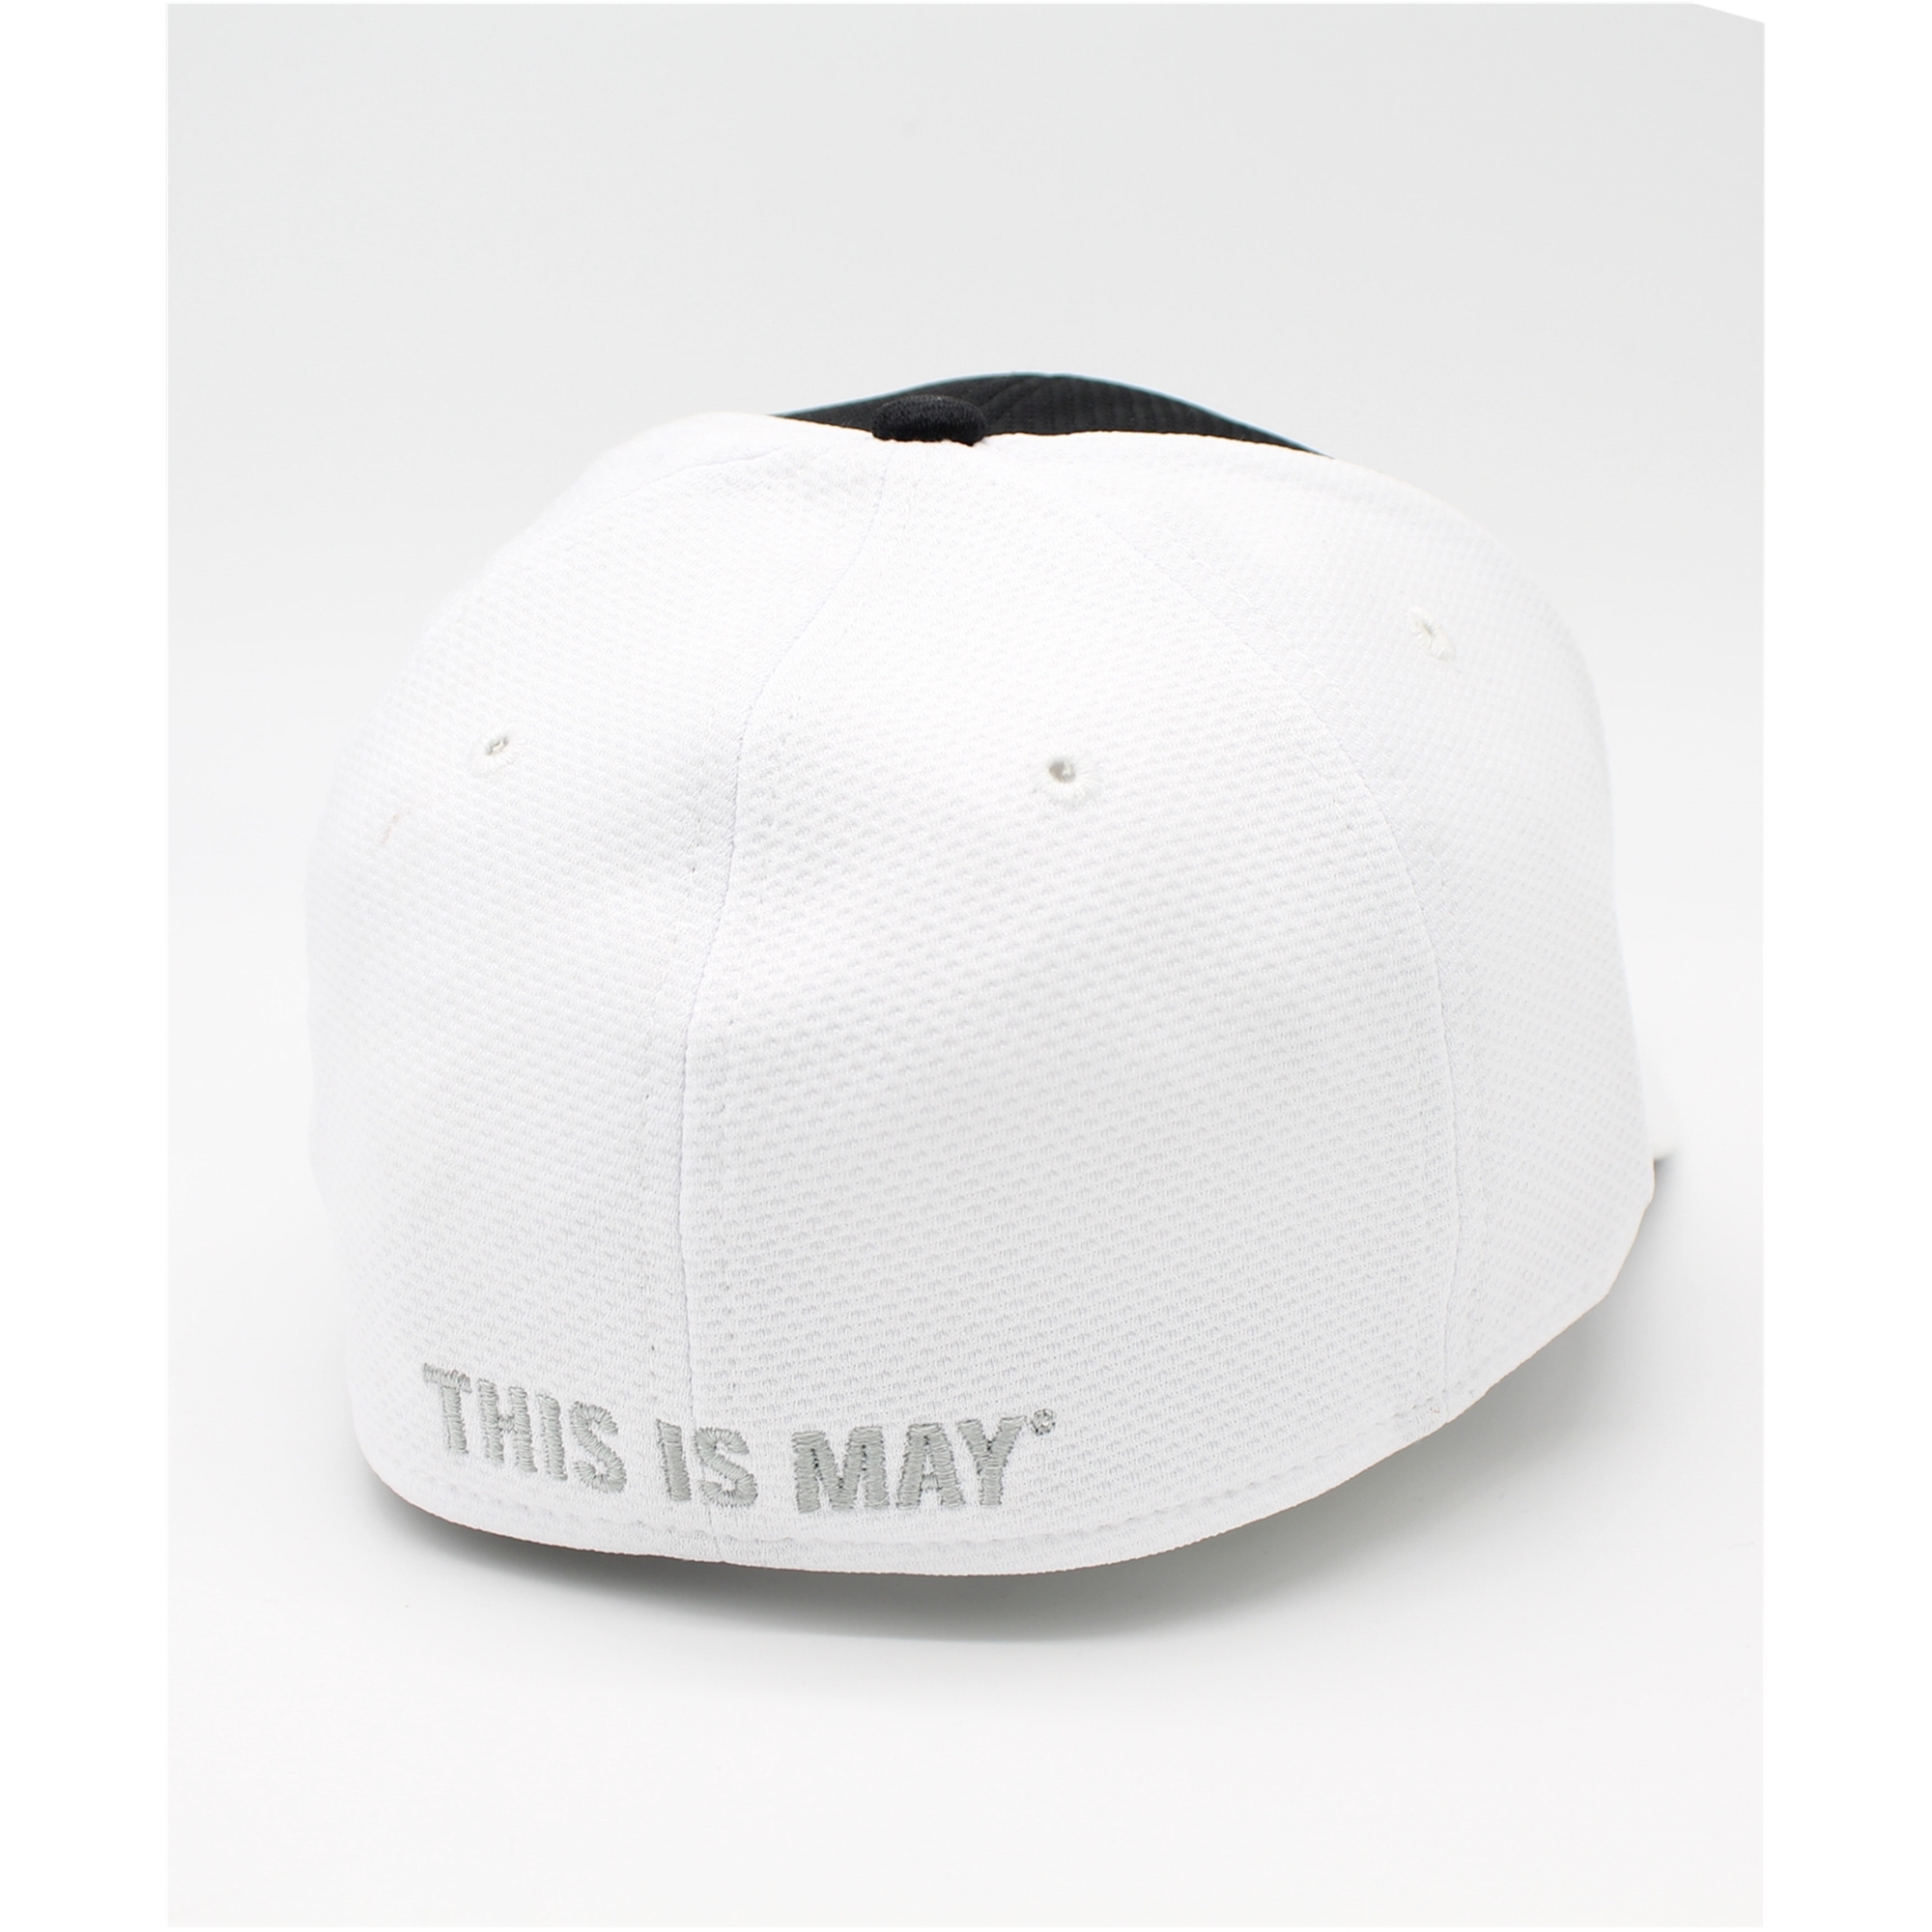 INDY 500 Mens This Is May Fitted Baseball Cap, White, S/M - image 2 of 4